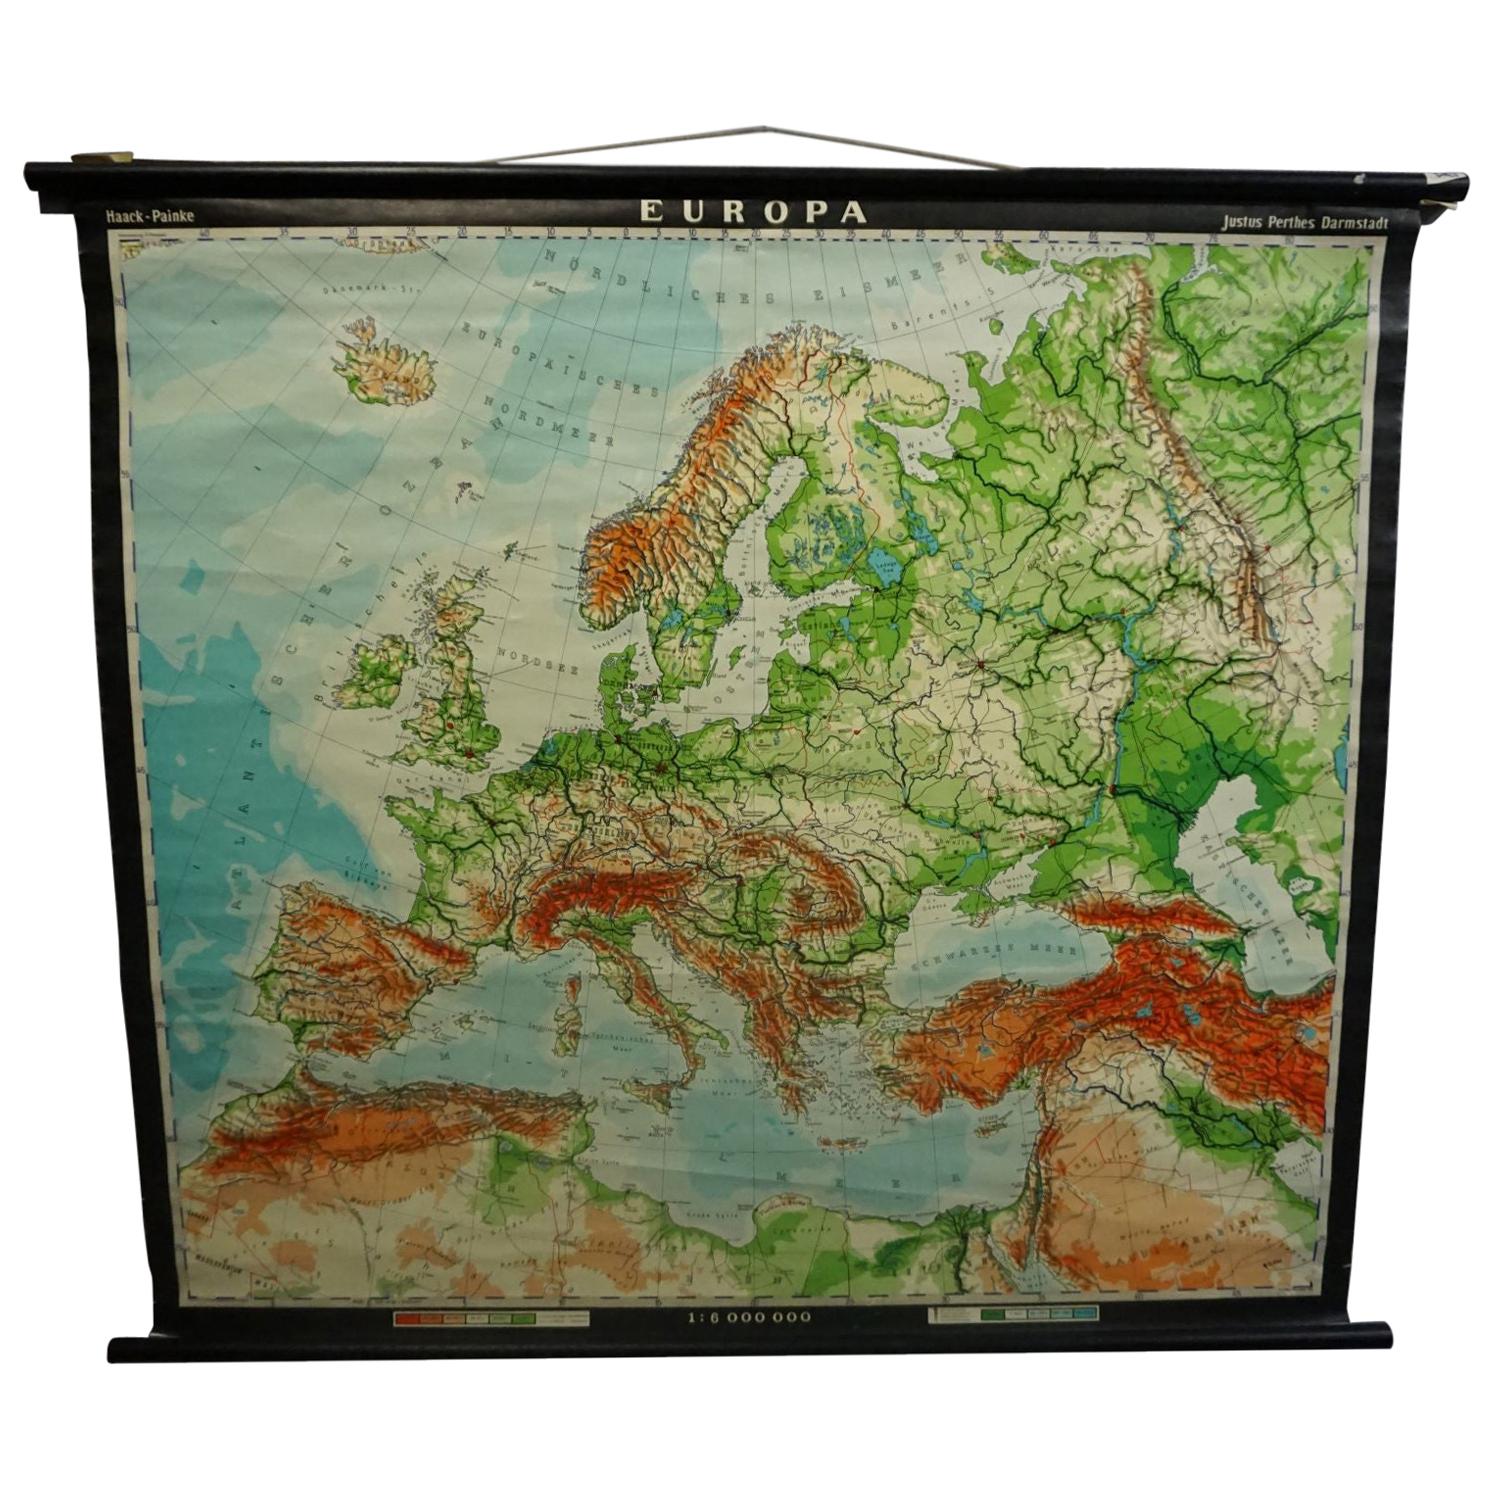 Vintage Pull Down Map Wall Chart about Europe